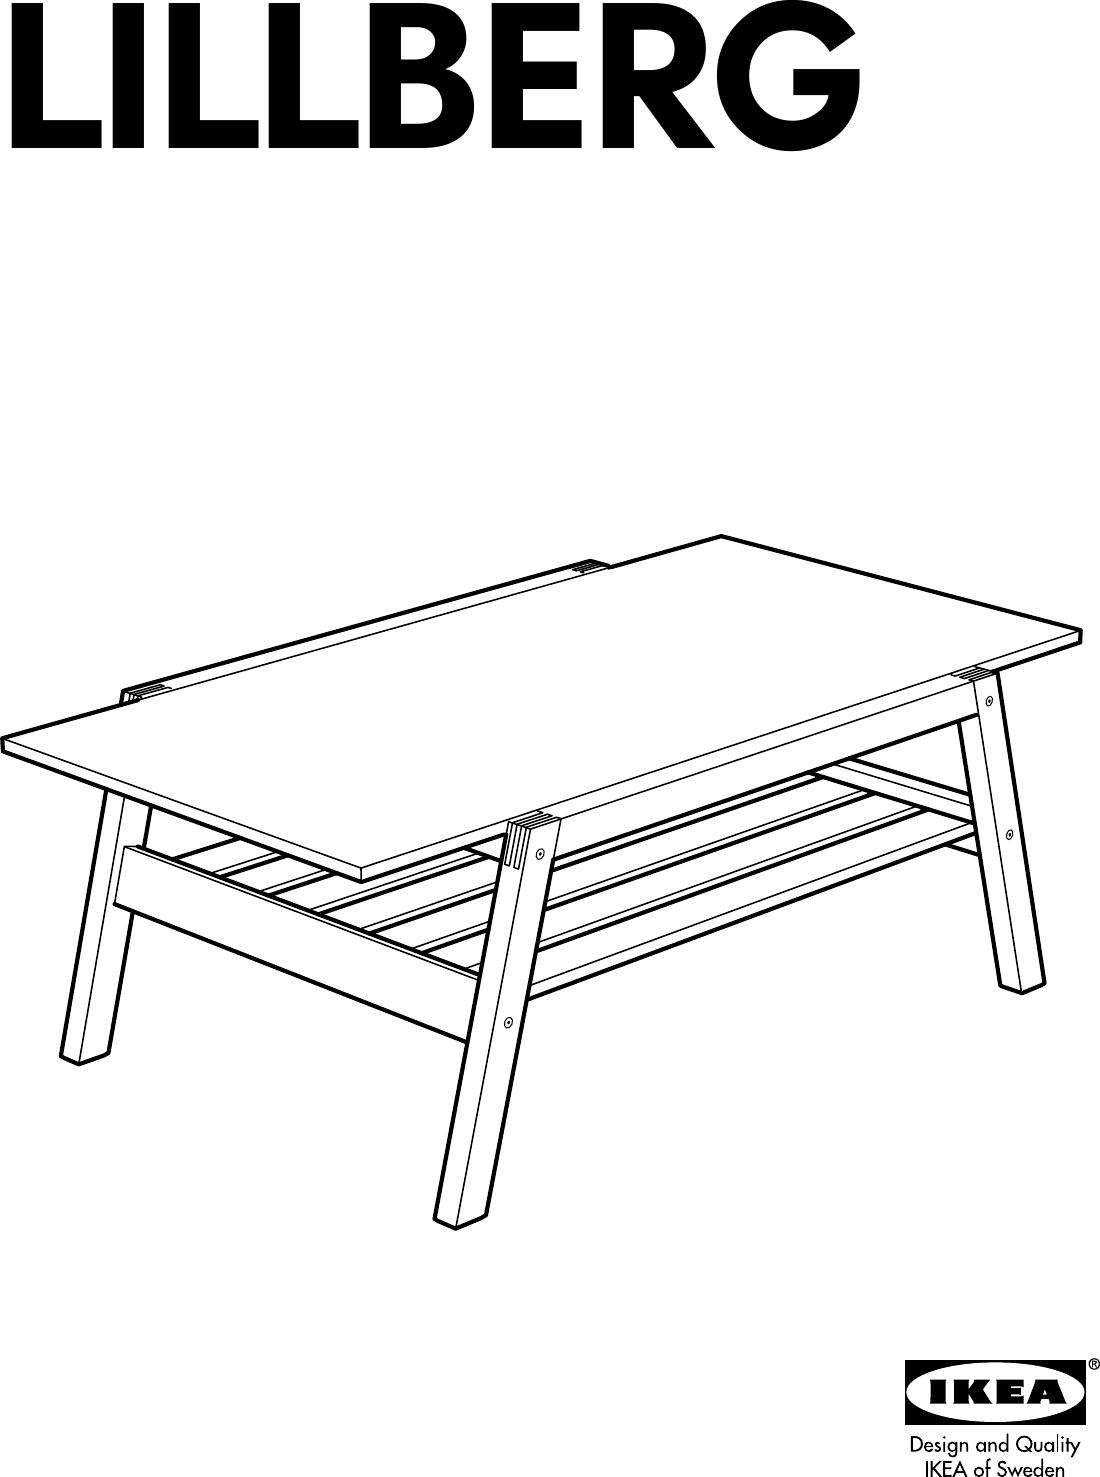 Page 1 of 12 - Ikea Ikea-Lillberg-Coffee-Table-Assembly-Instruction